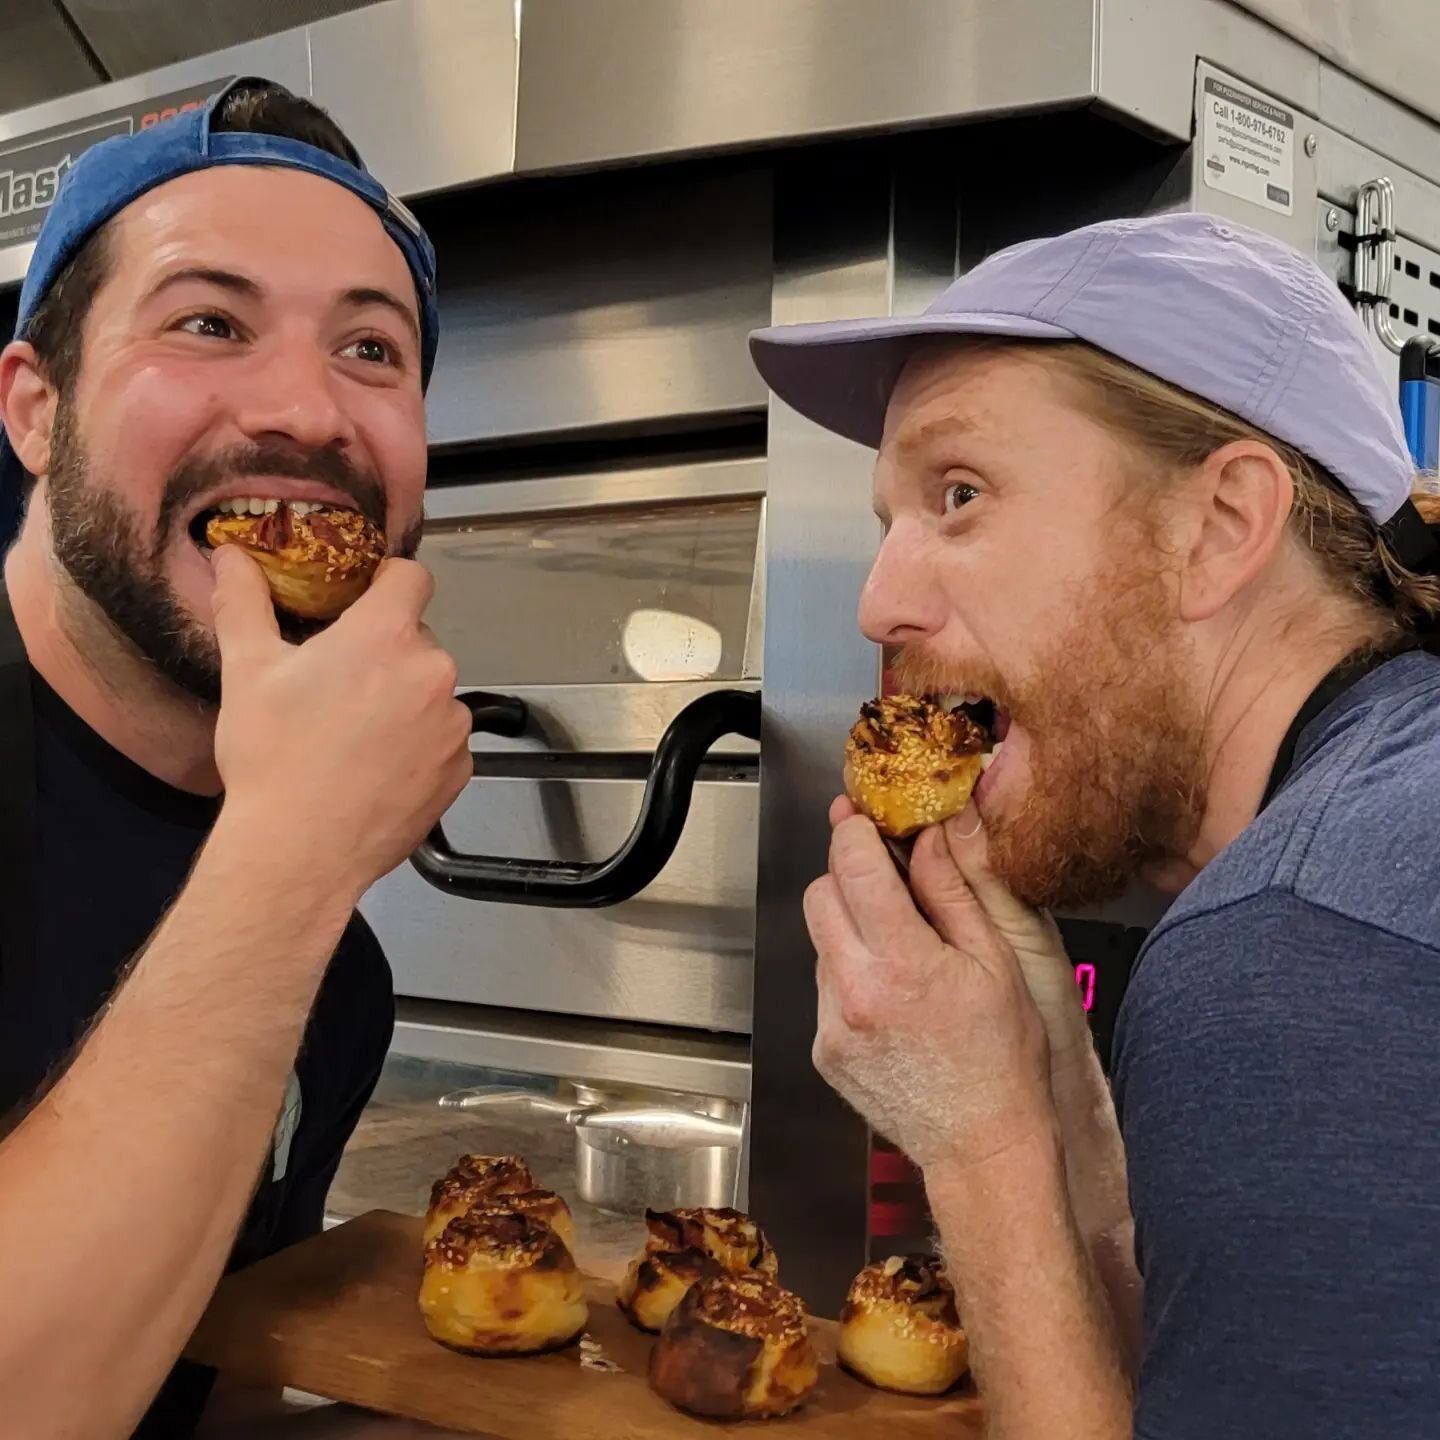 Saturdays are spent getting cute pics of the guys with their varoius forms of pizza📸

Available tomorrow 10:30am 🌞
Pizza Pinwheels🍕🎡
Pepperoni &amp; cheese rolled into pizza dough. If y'all like them, maybe we will do them more often 🫣 

Also av